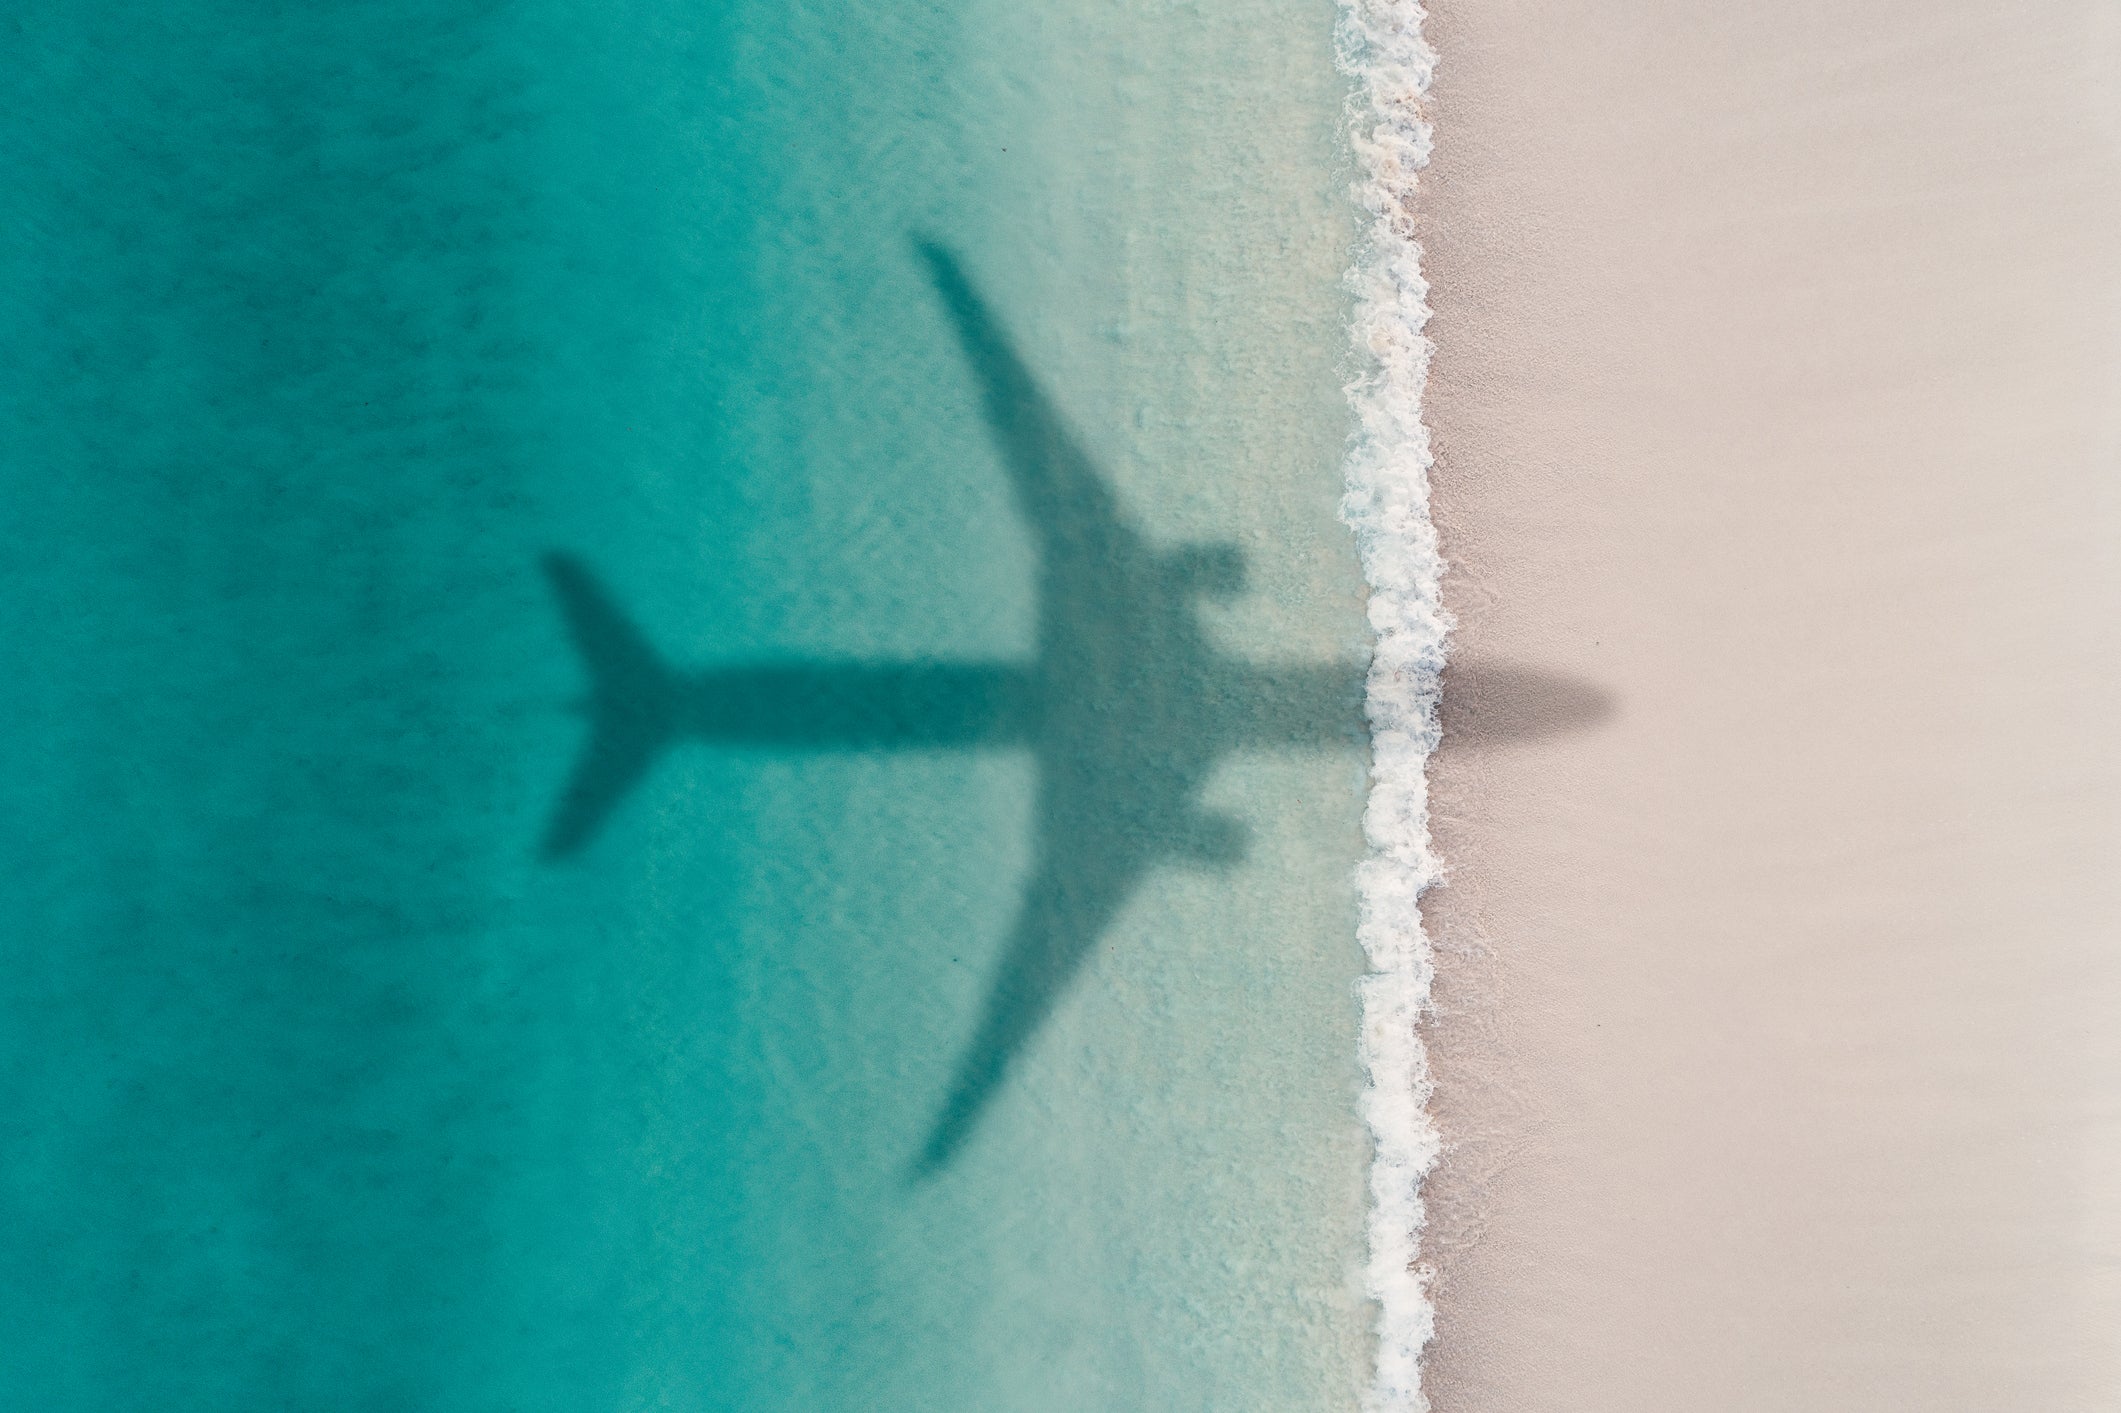 Deal alert: Get up to 75% off round-trip domestic flights